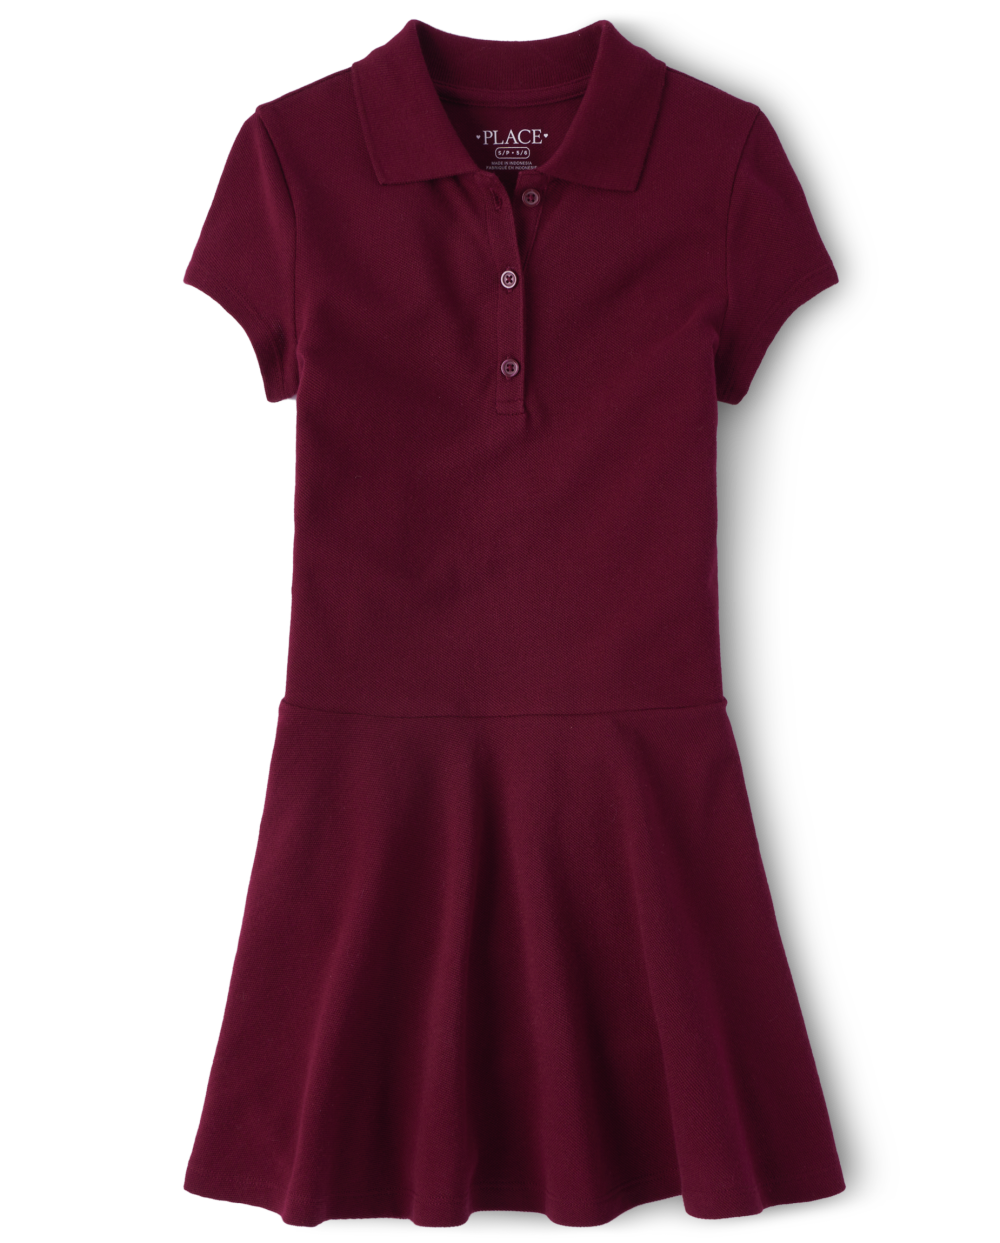 Girls Collared Above the Knee Short Sleeves Sleeves Dress